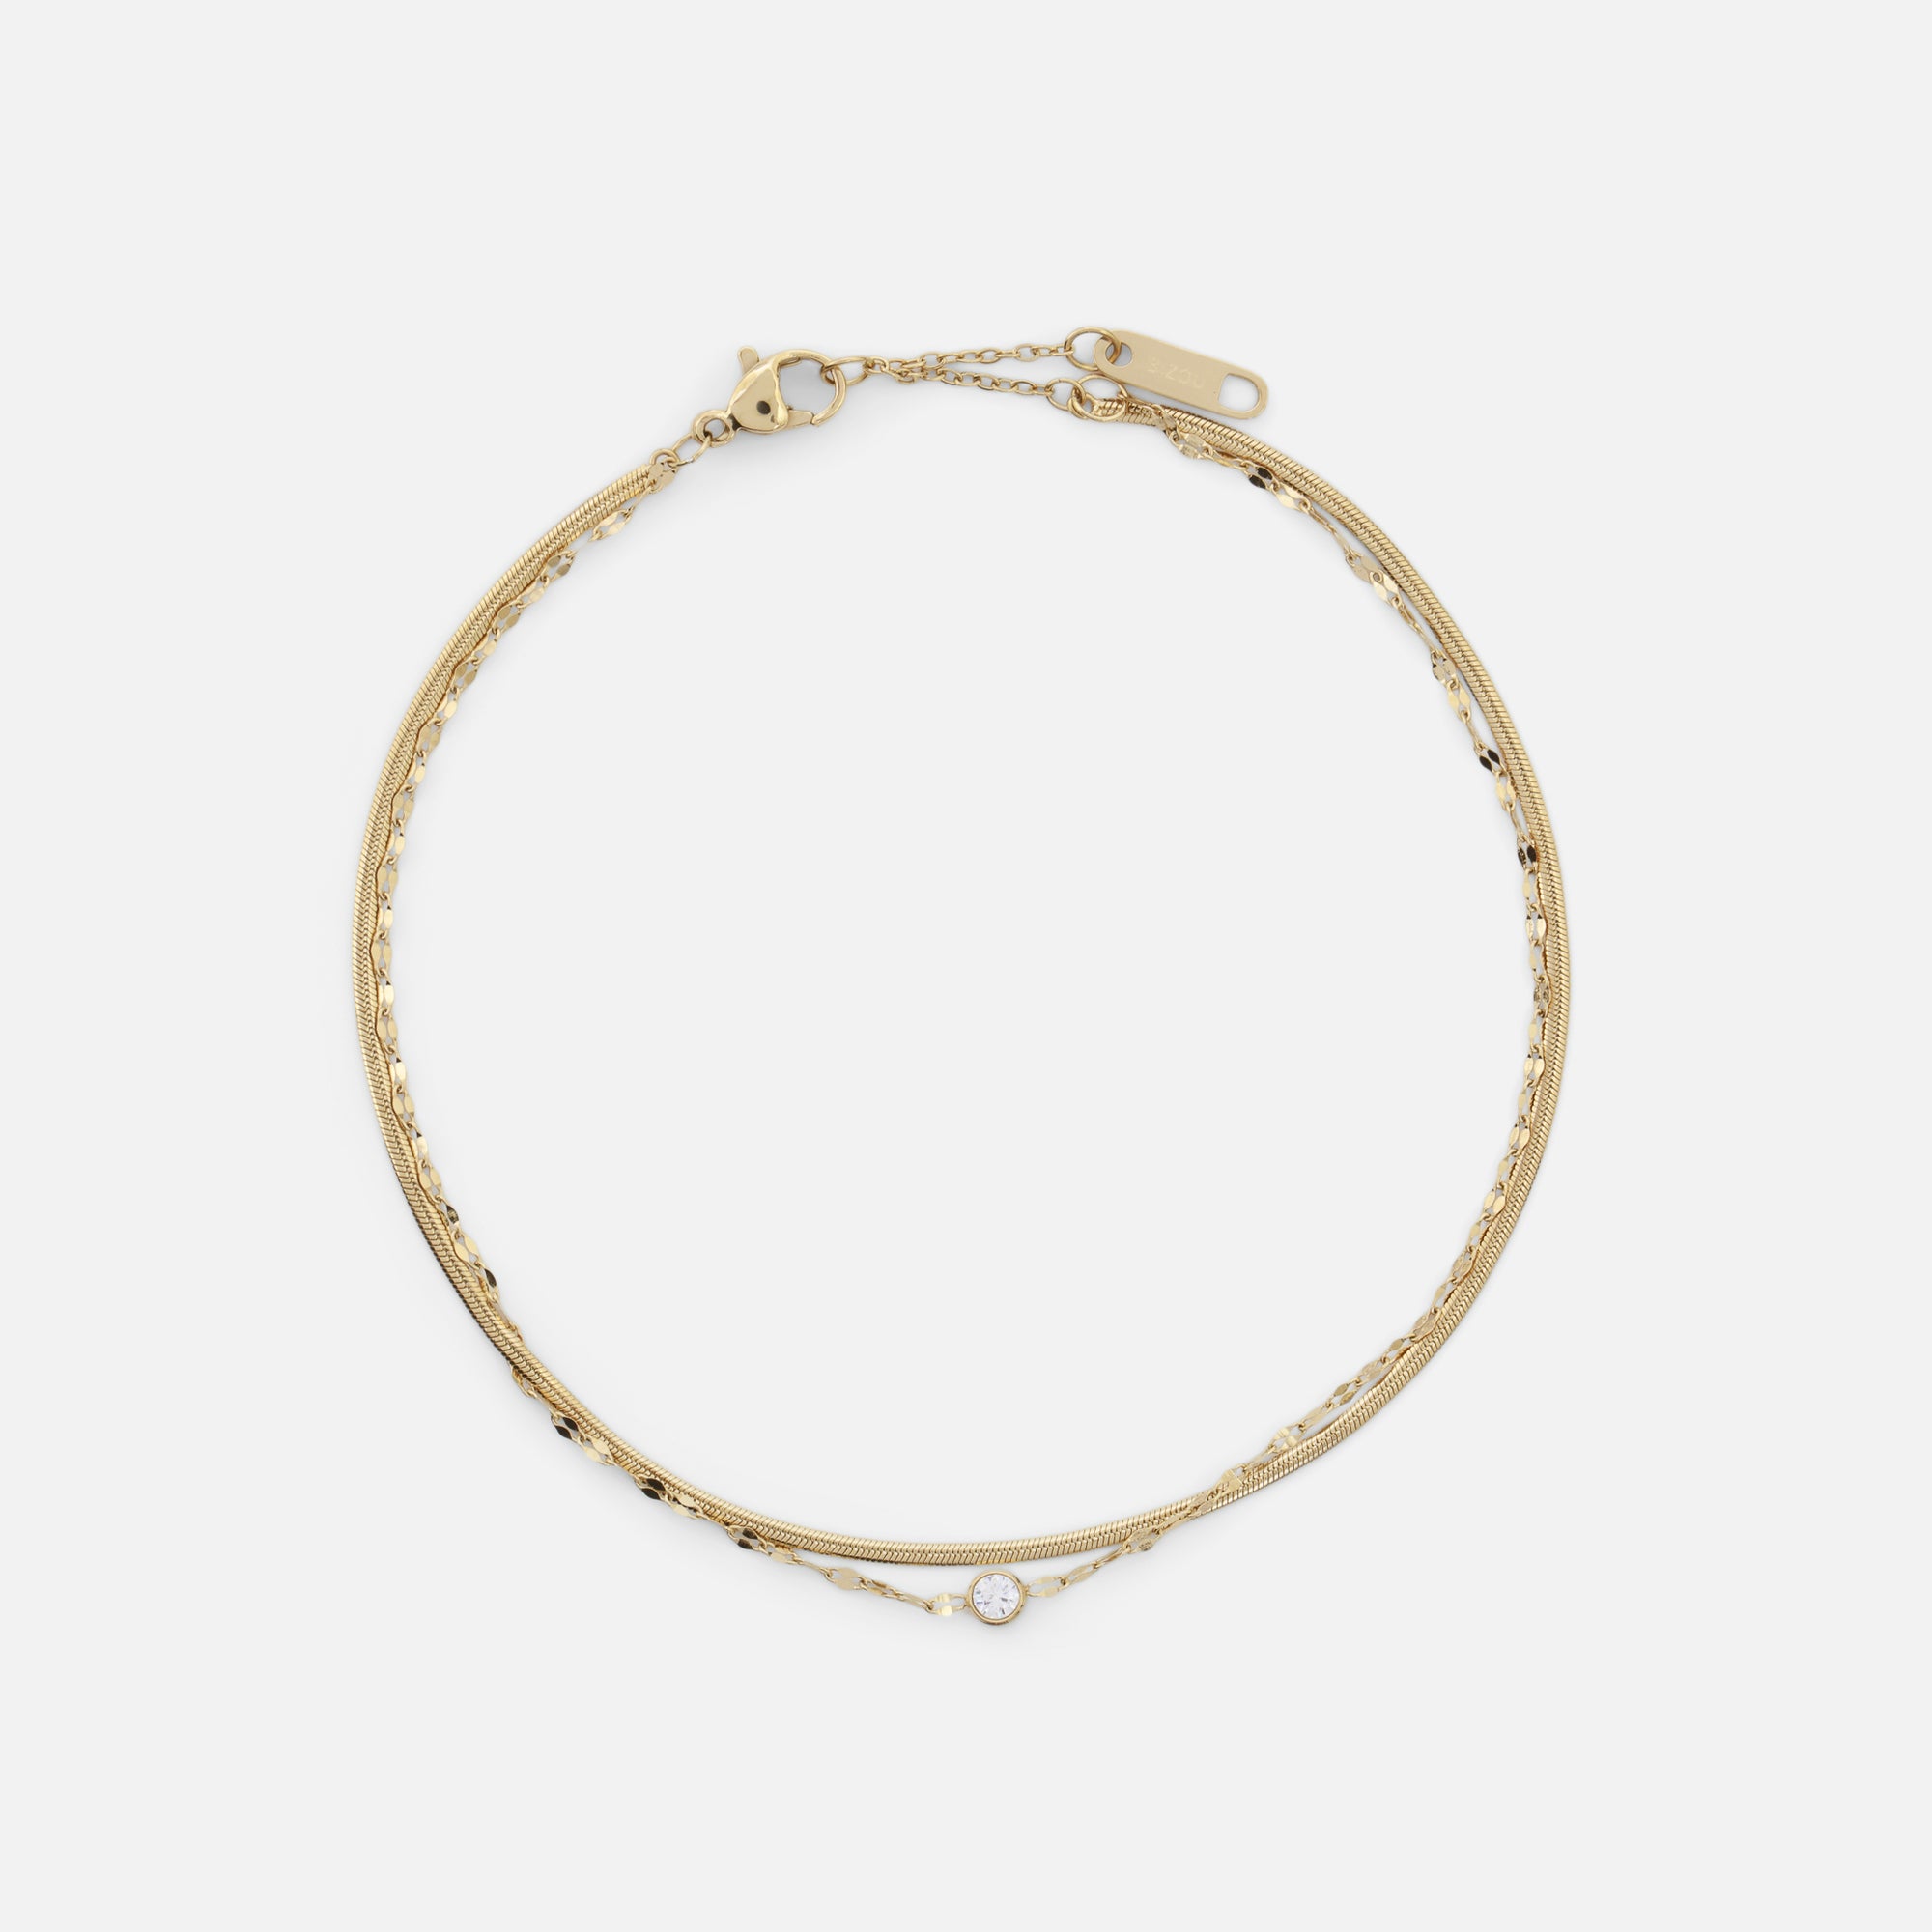 Stainless steel golden ankle chain with stone and snake chain